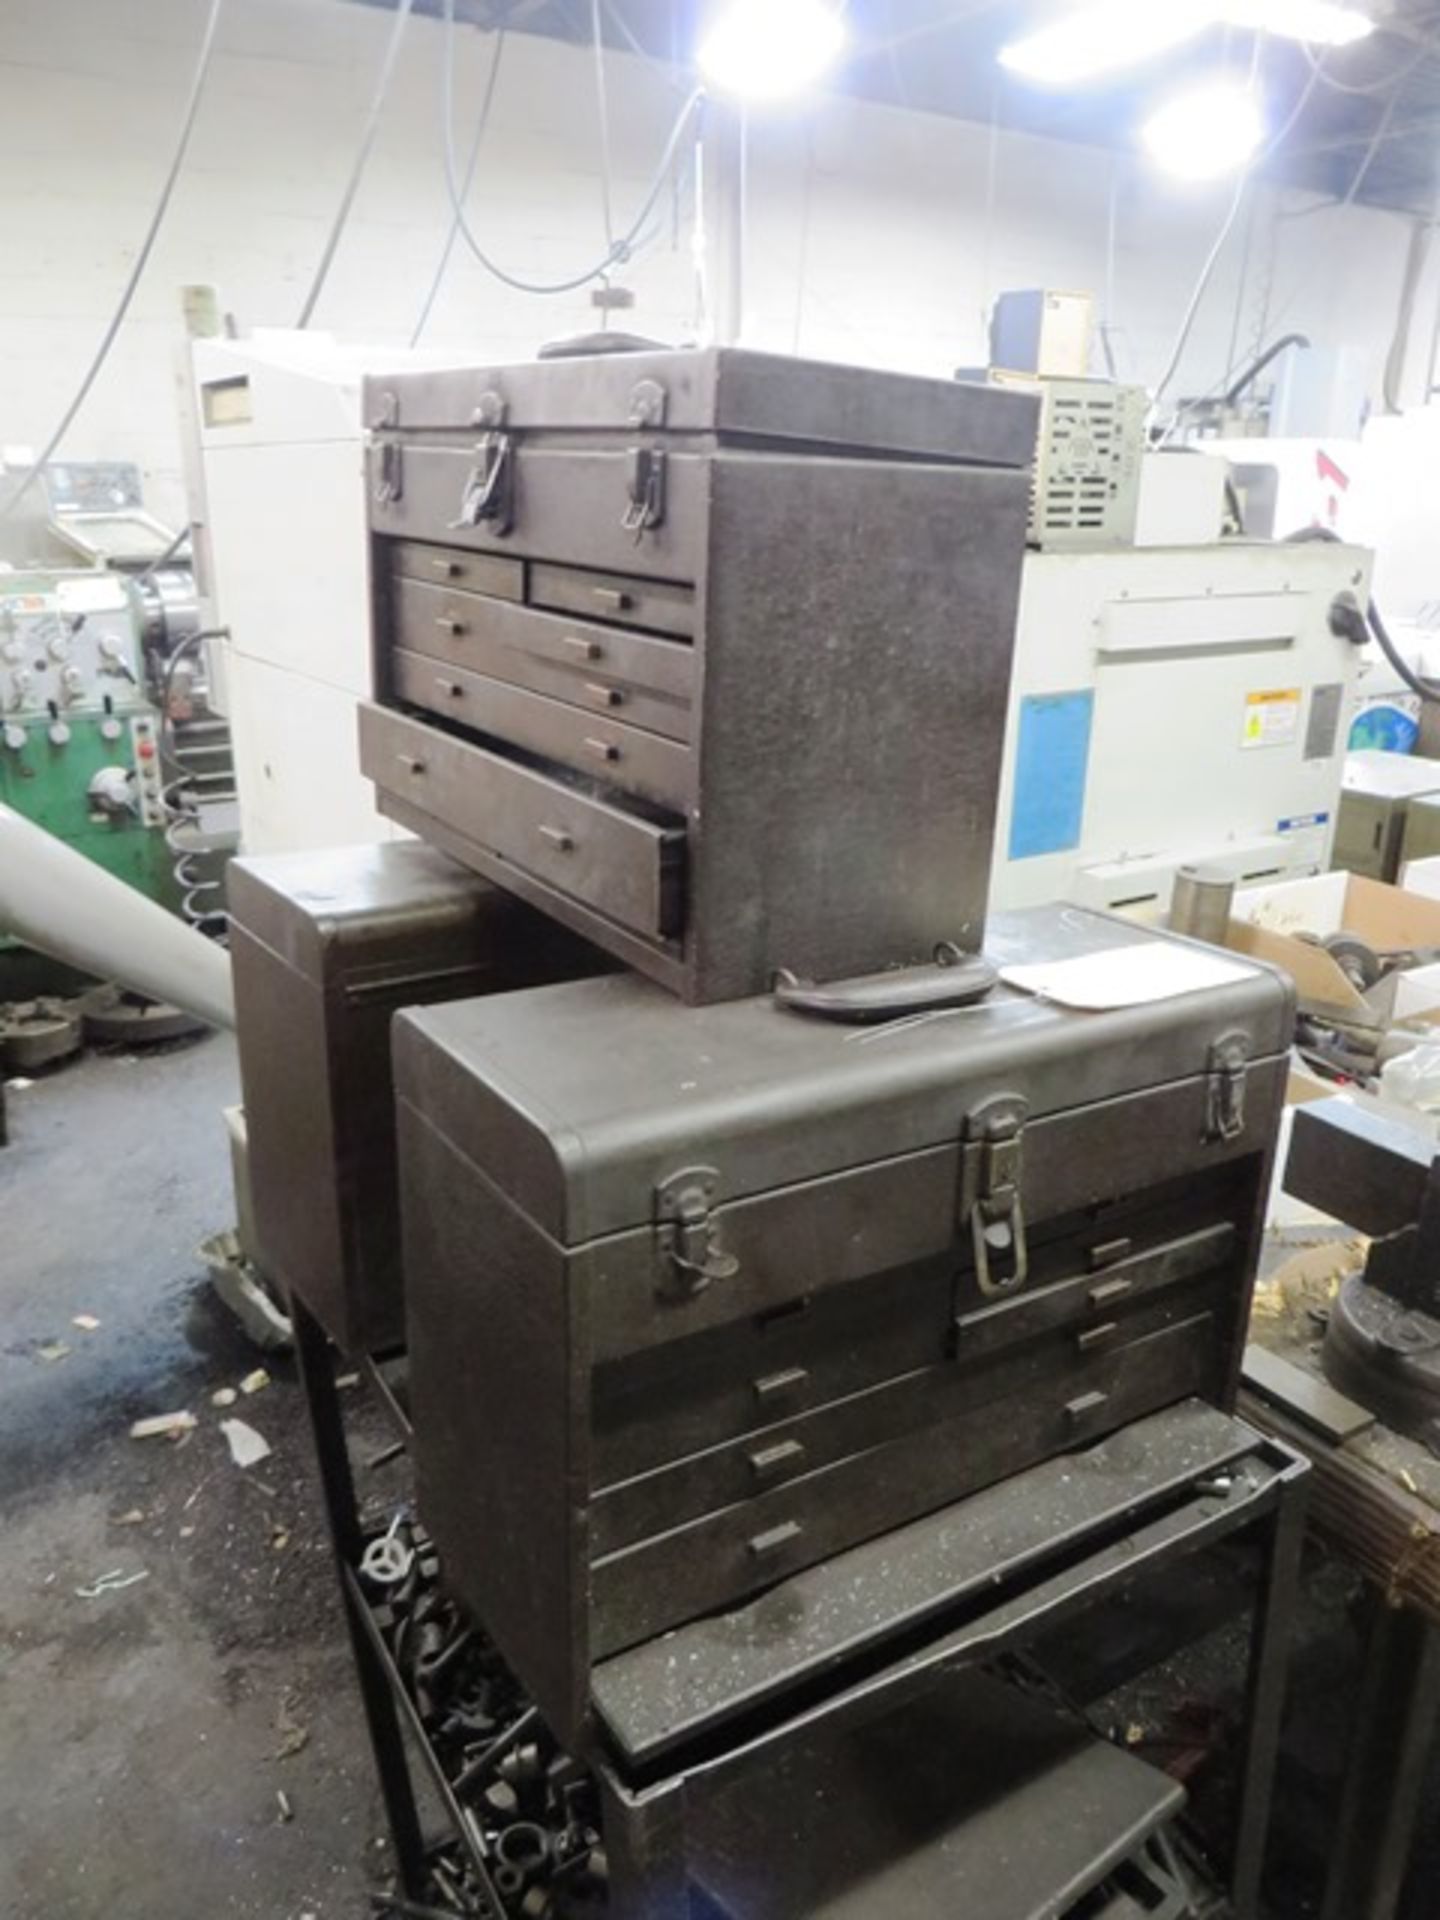 (3) Tool Boxes